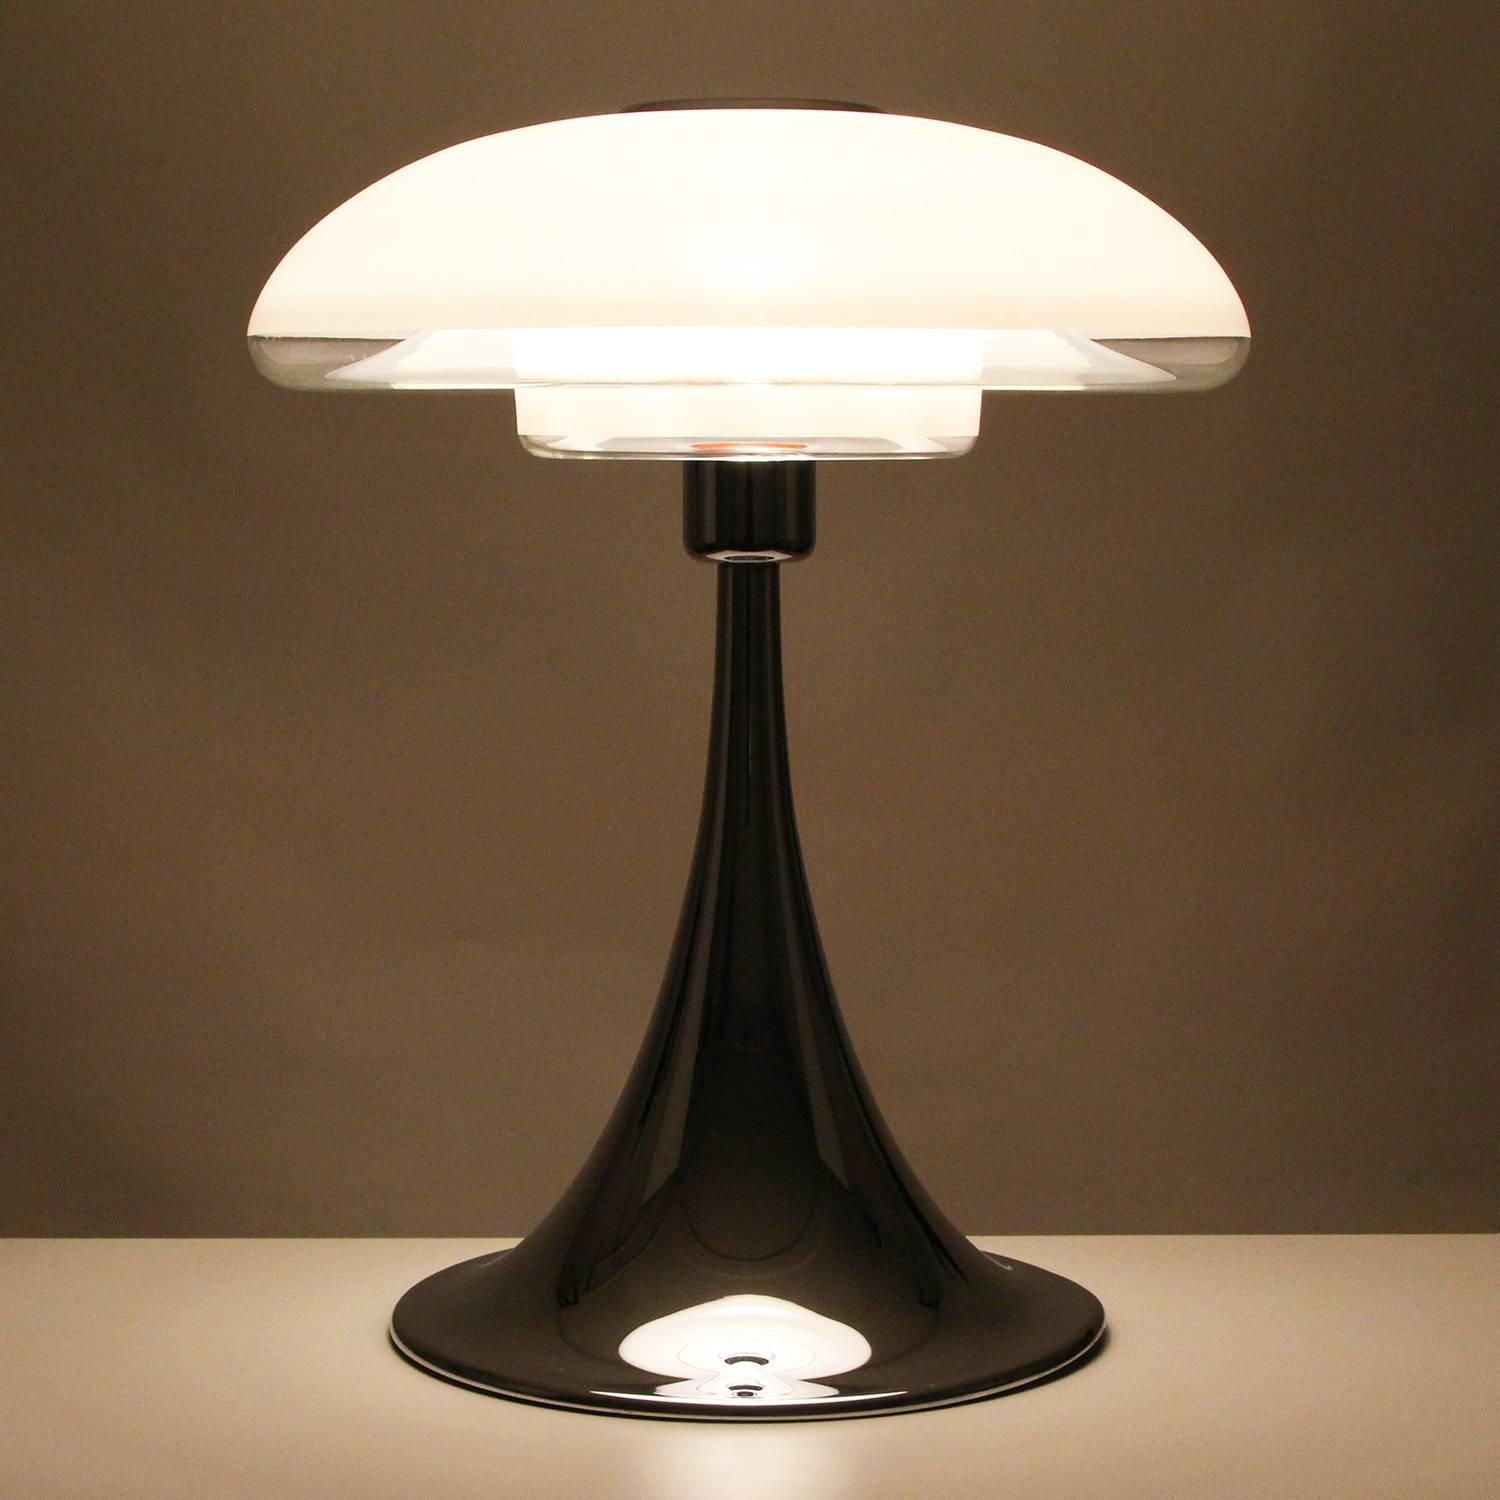 VP Europa, large table lamp by Verner Panton in 1977 and produced by Louis Poulsen the following year - rare opal and chrome table light.

If you are looking for grade A, top-tier, rare, collectible Danish designer lighting, look no further! You